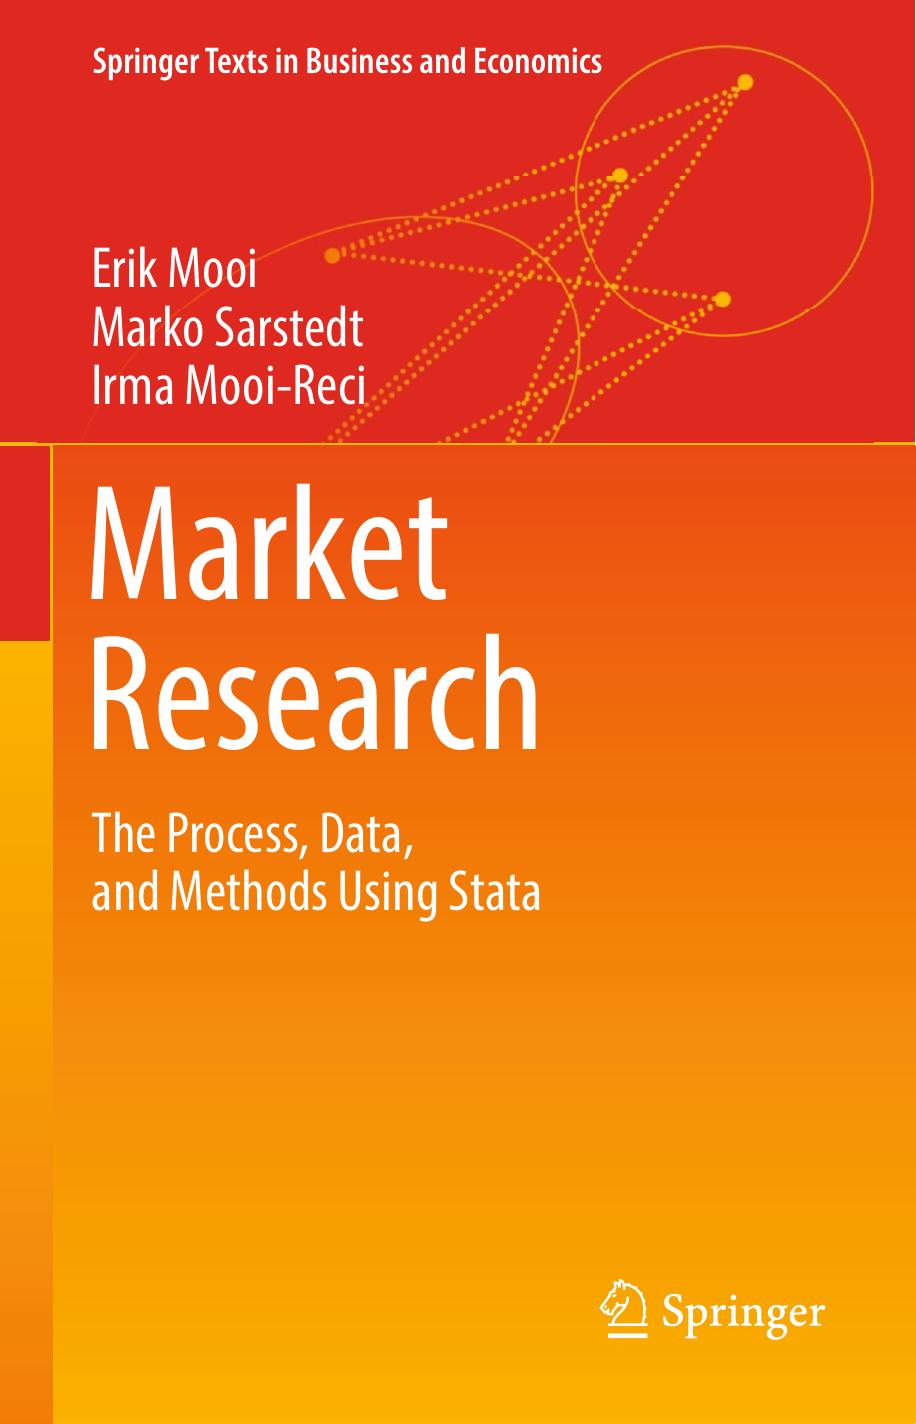 Market Research  The Process, Data, and Methods Using Stata 2018